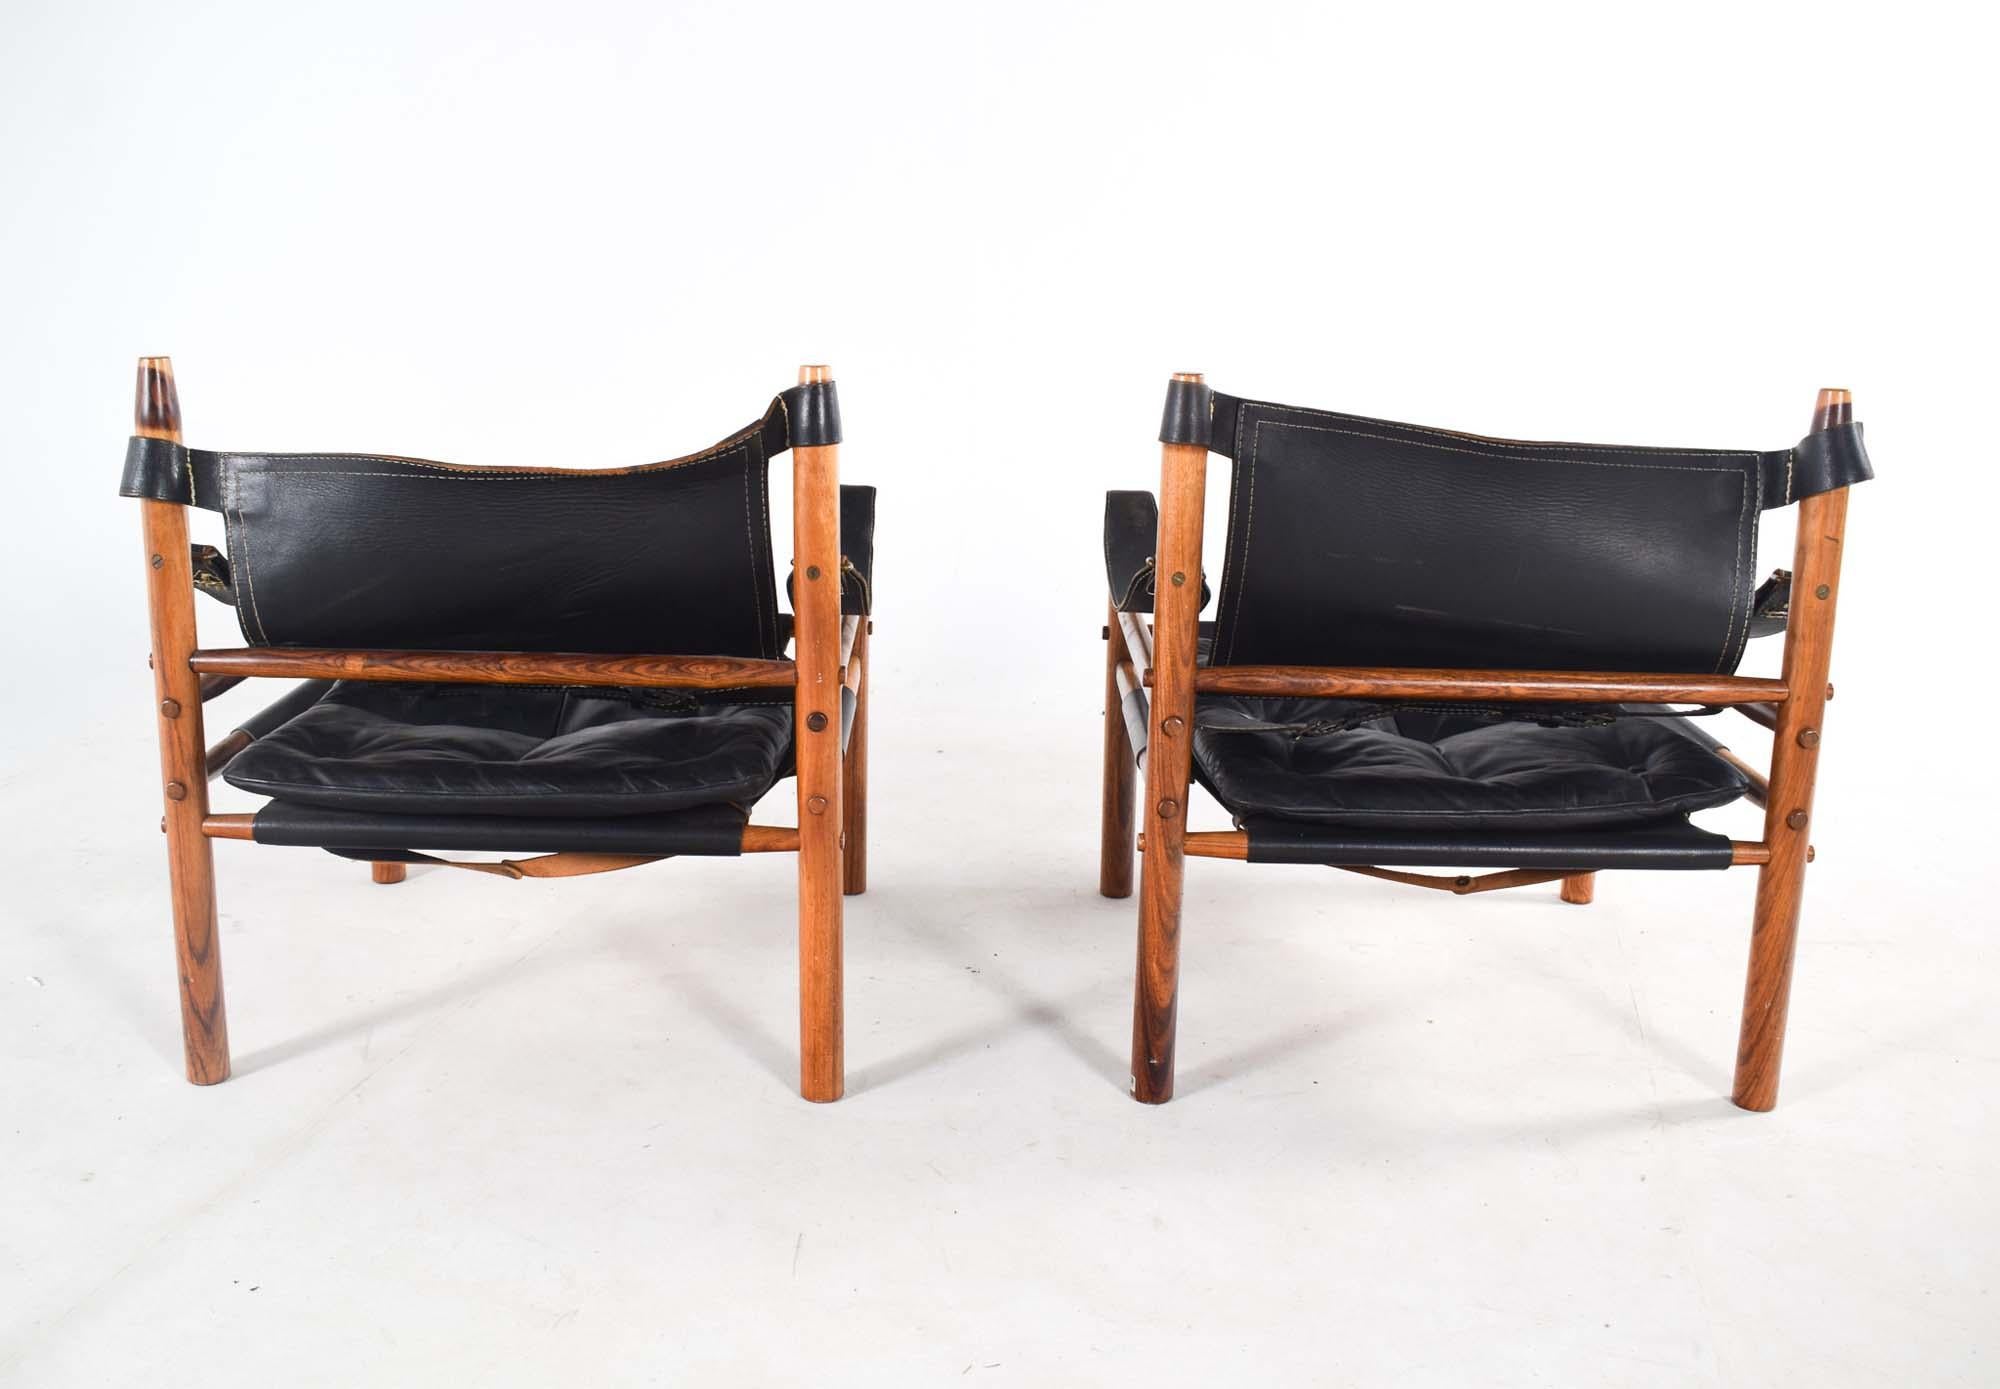 20th Century Modern Pair of Rosewood “Sirocco” Armchairs by Arne Norell, 1960 For Sale